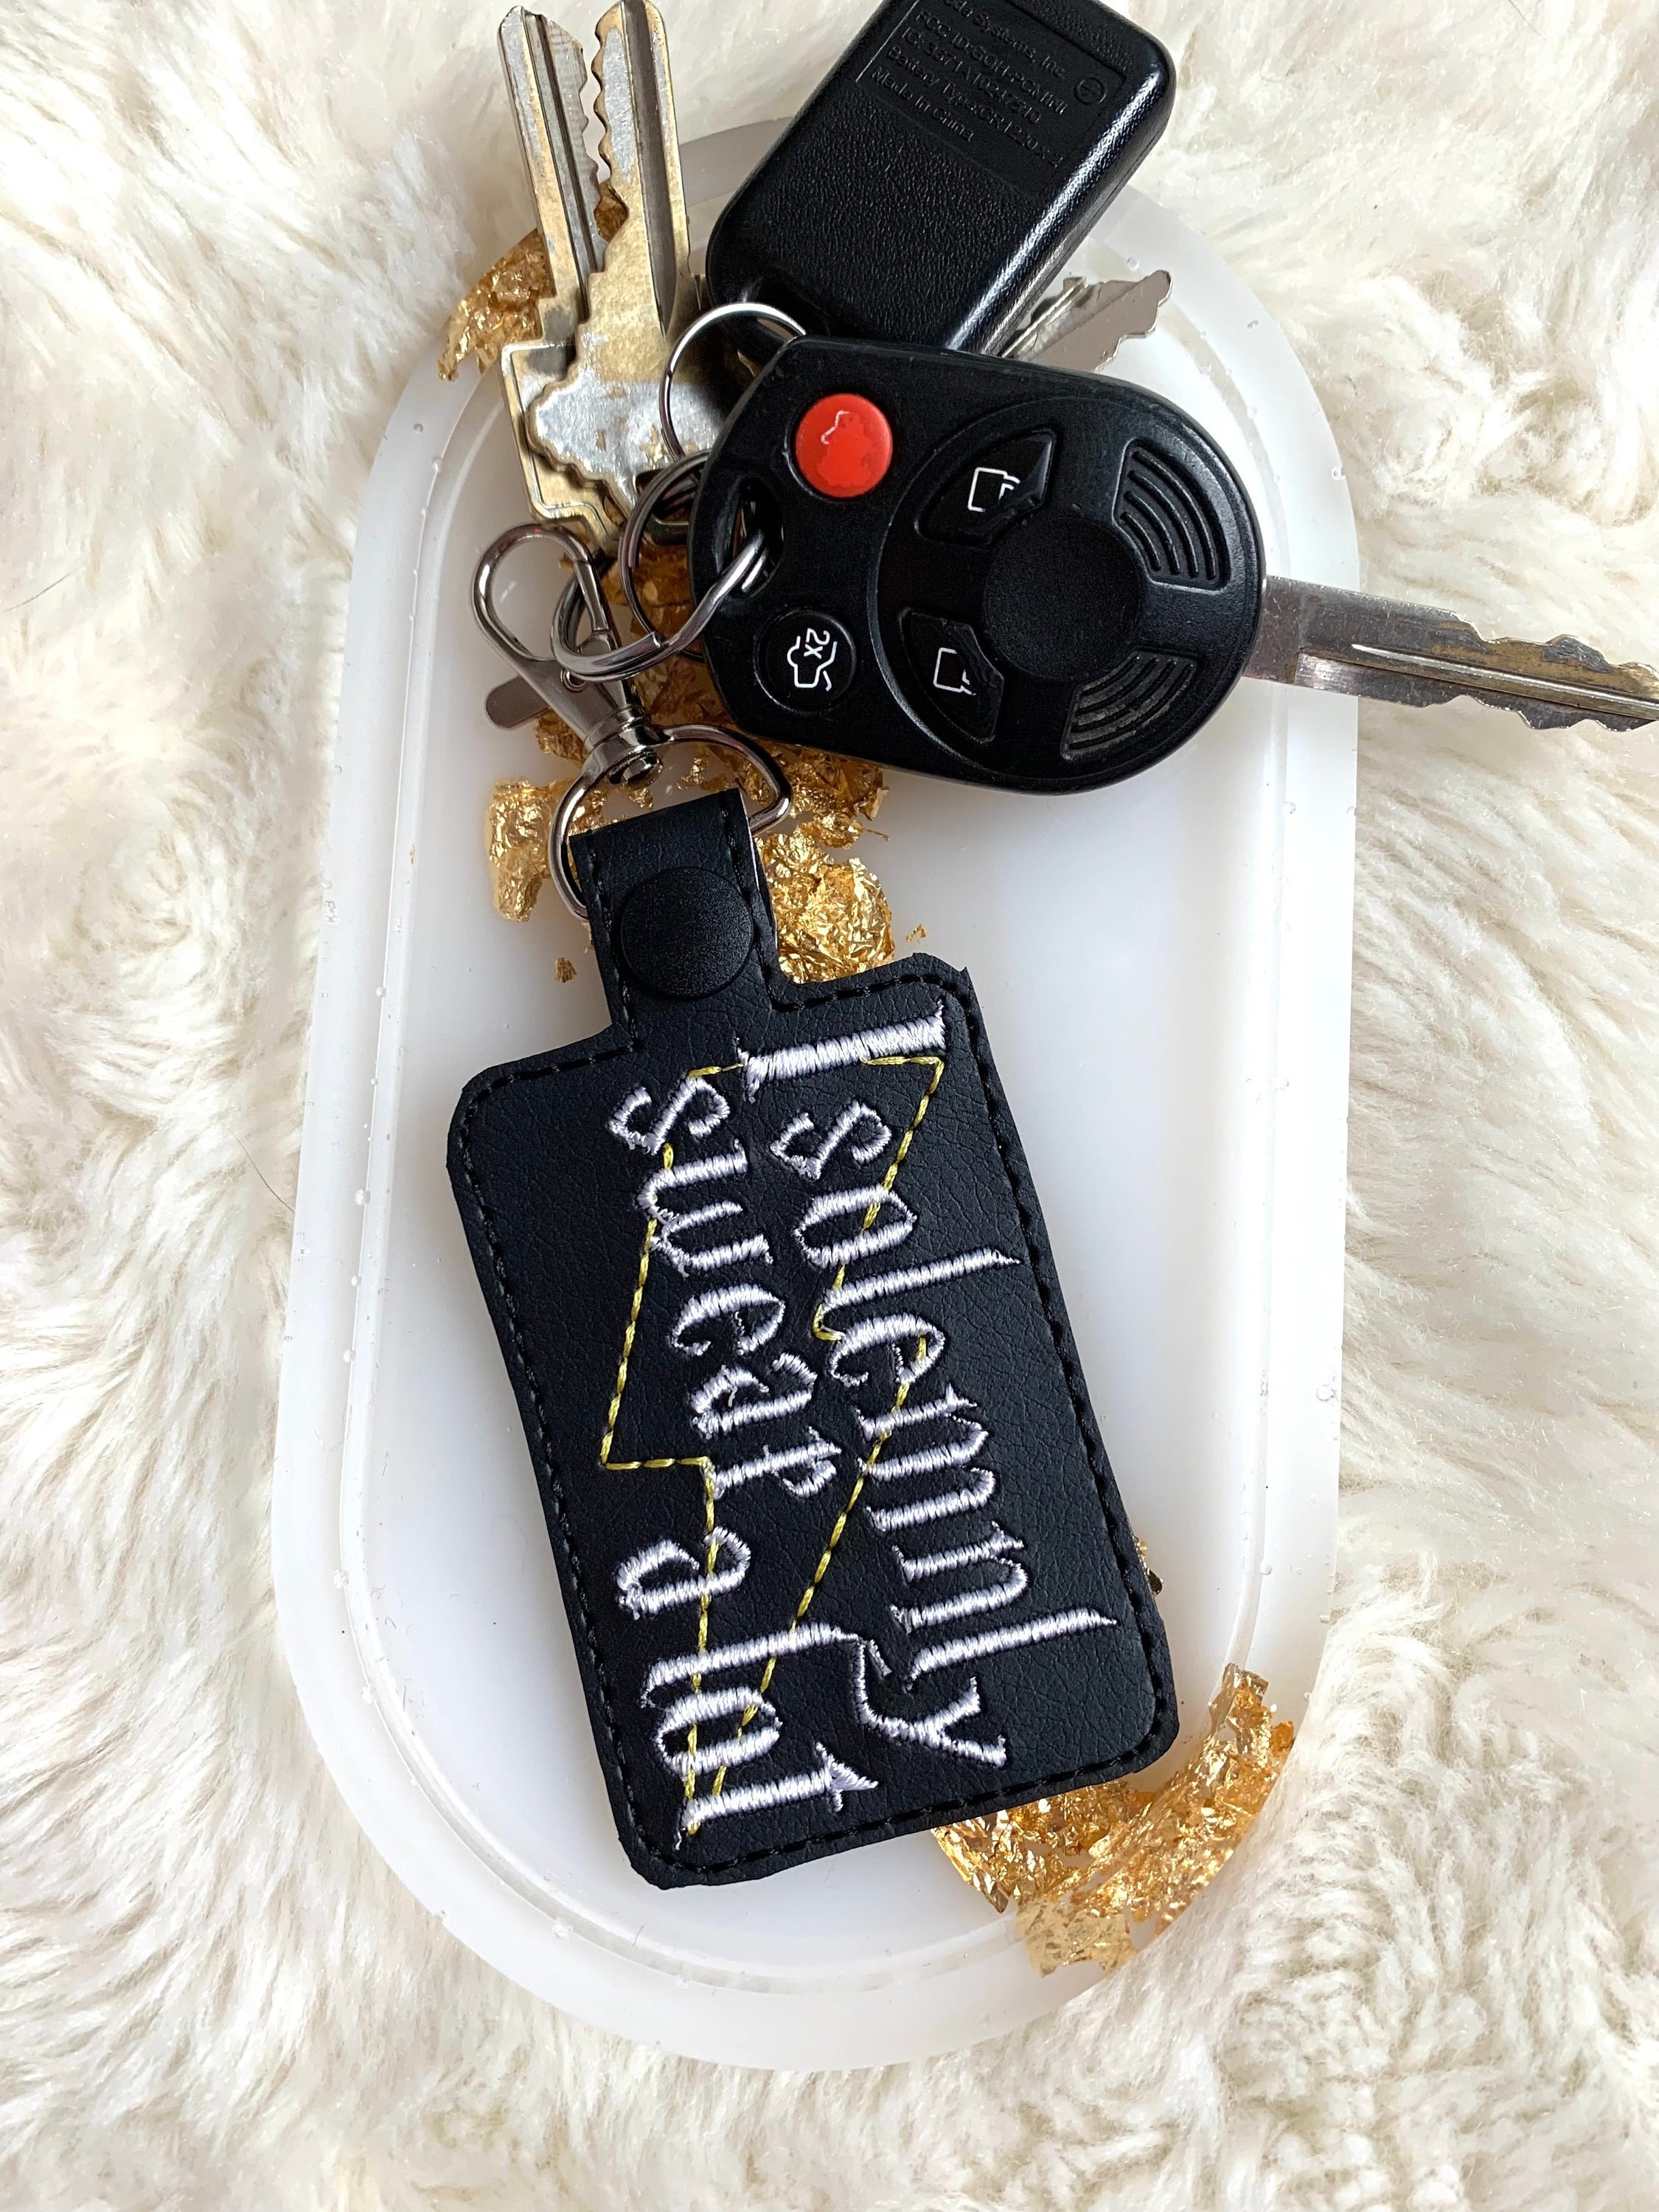 sewciopathc Solemnly Swear Keychain, Gift for Him Her They Girls Boys, Embroidered, HP, Lightening Bolt